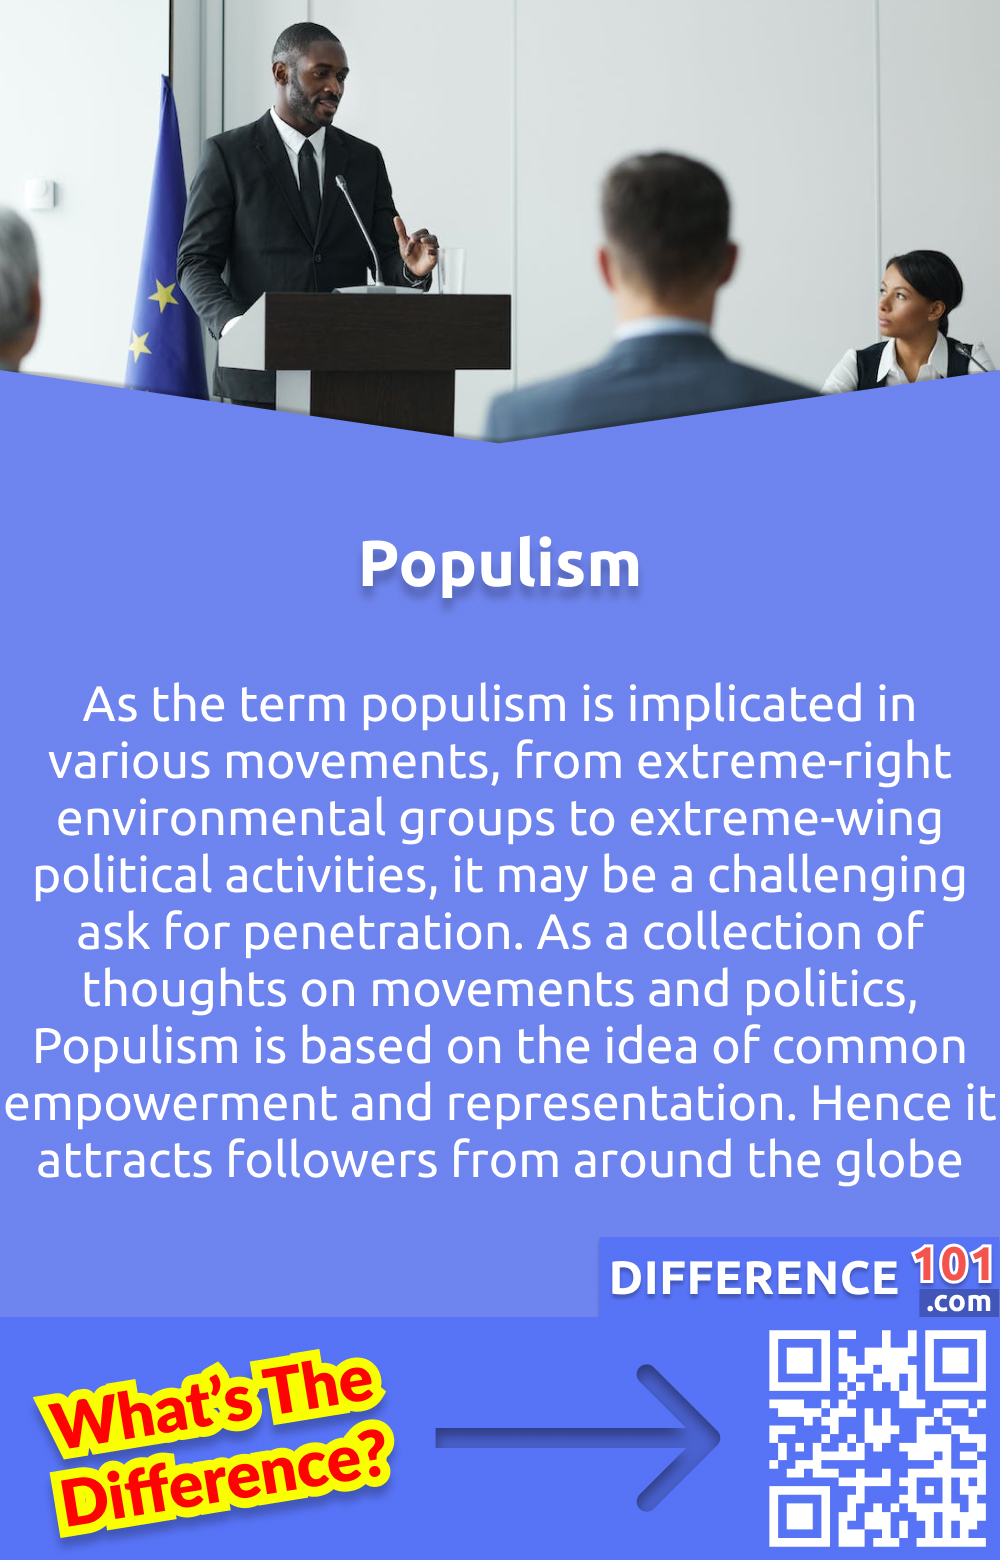 What Is Populism? As the term populism is implicated in various movements, from extreme-right environmental groups to extreme-wing political activities, it may be a challenging ask for penetration.
As a collection of thoughts on movements and politics, Populism is based on the idea of common empowerment and representation. Hence it attracts followers from around the globe.